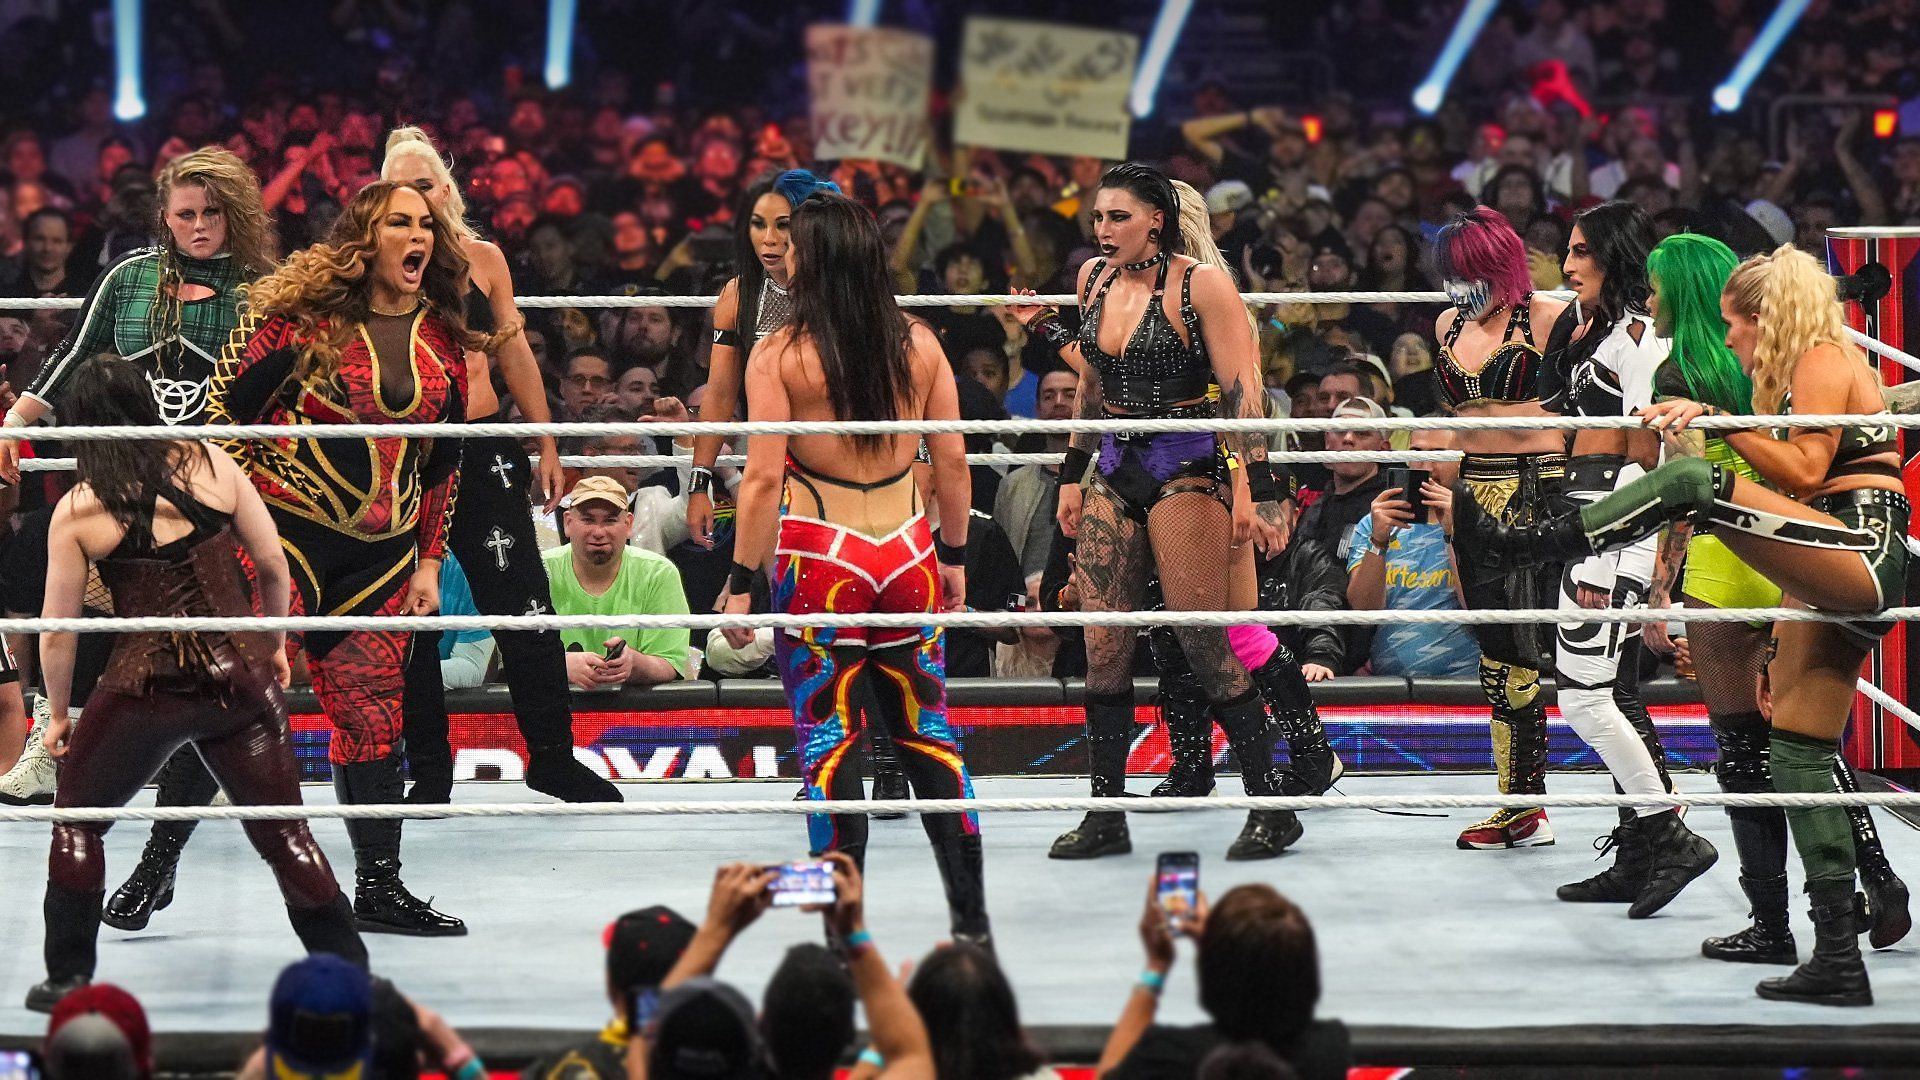 Will there be many Royal Rumble surprises?